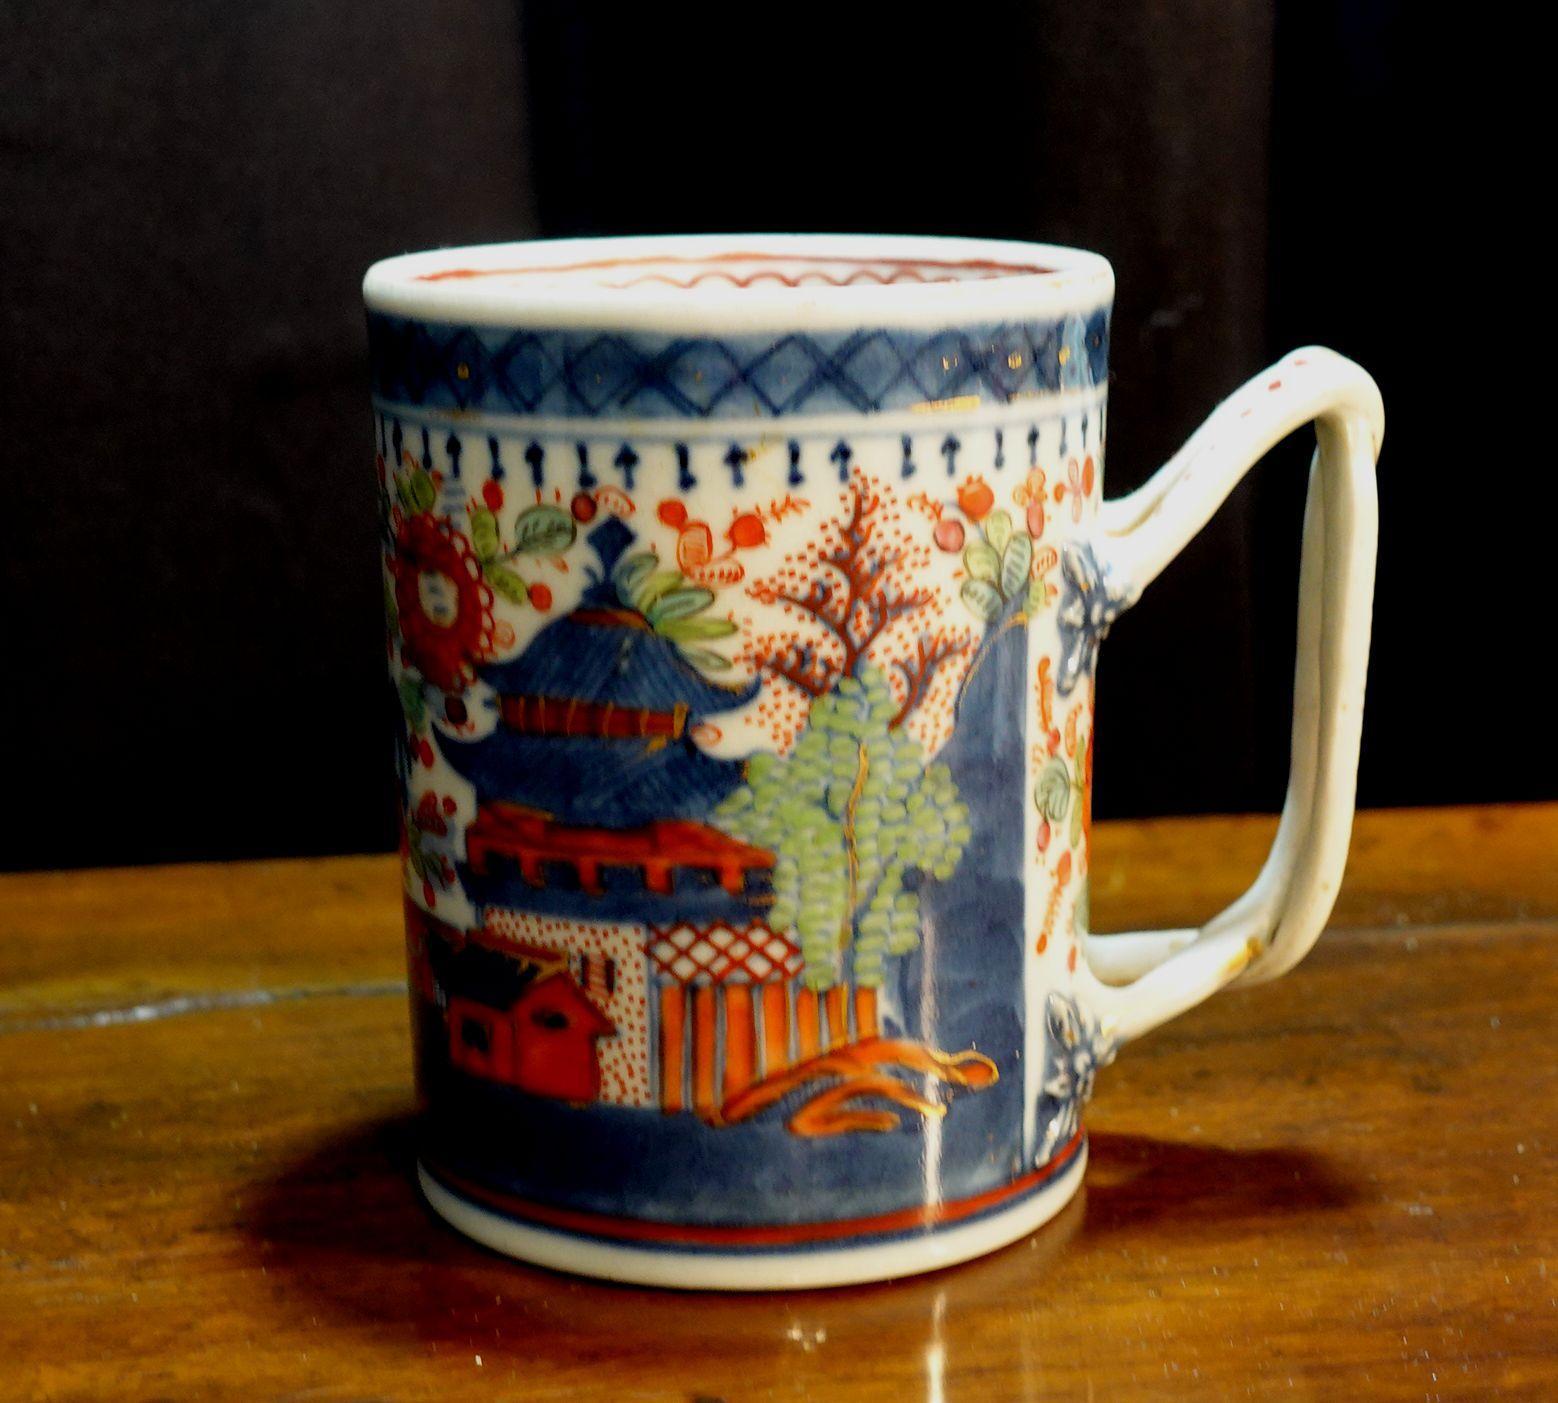 Kangxi Imari Porcelain Mug(Tankard), from the 1700s. A supper and rear antique from the Kangxi period.
Height is 4 1/2